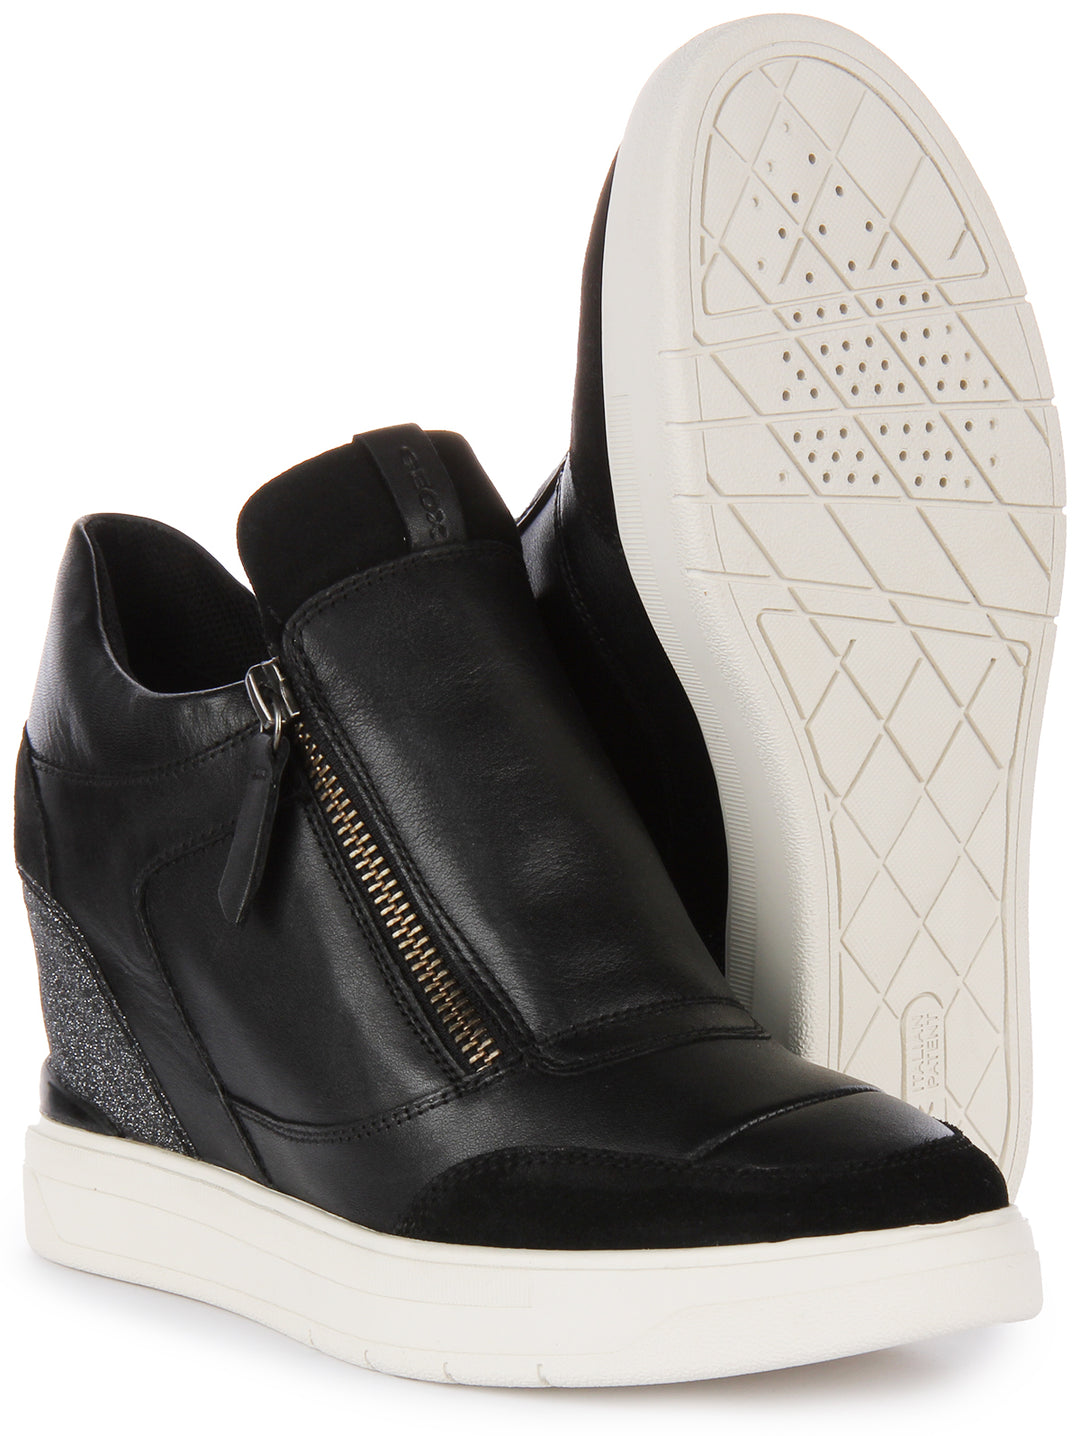 Geox D Maurica Wedge Trainer In Black For Women